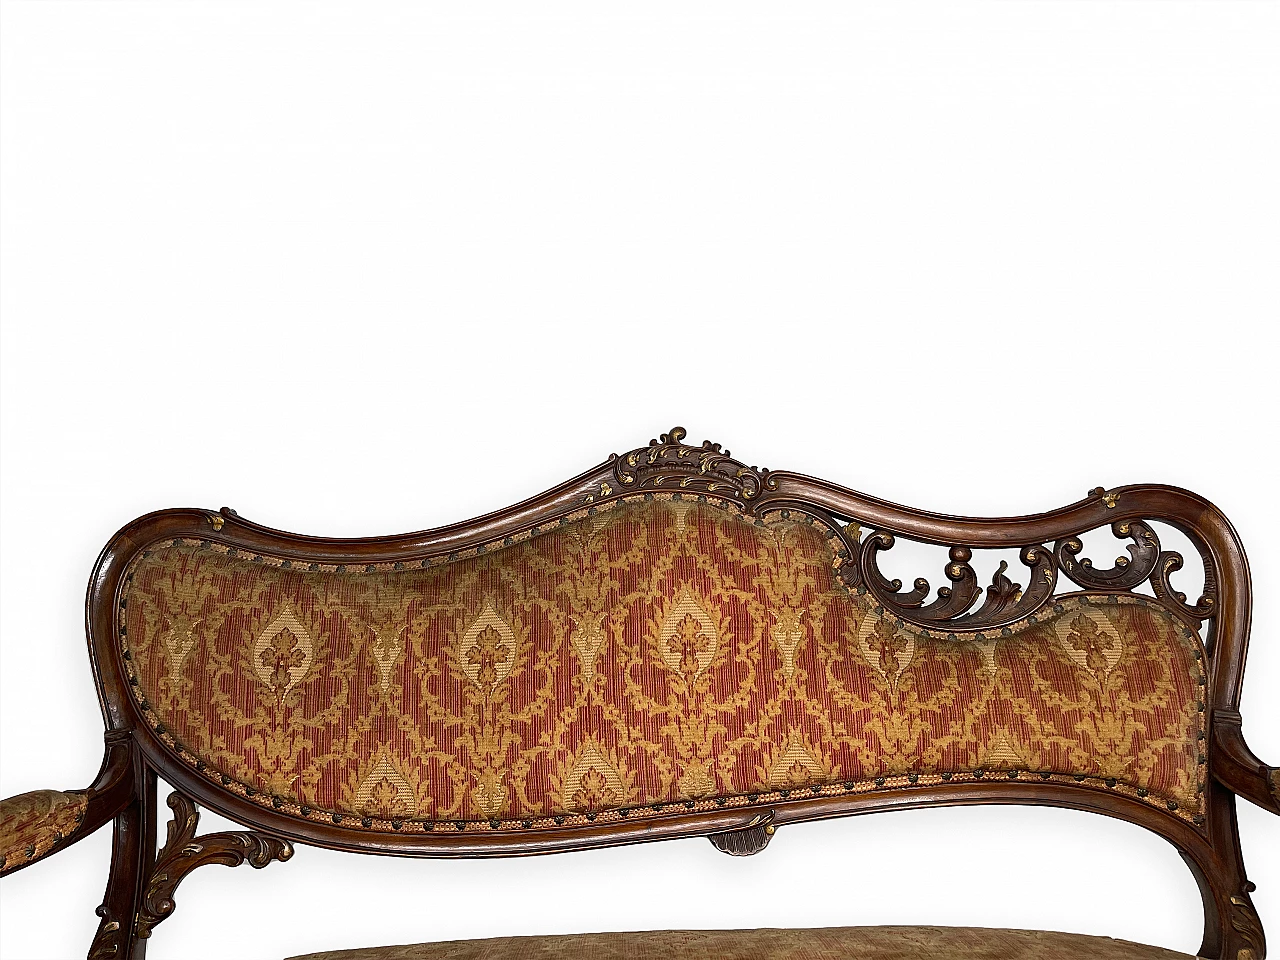 Rocaille-patterned wooden sofa, early 20th century 18